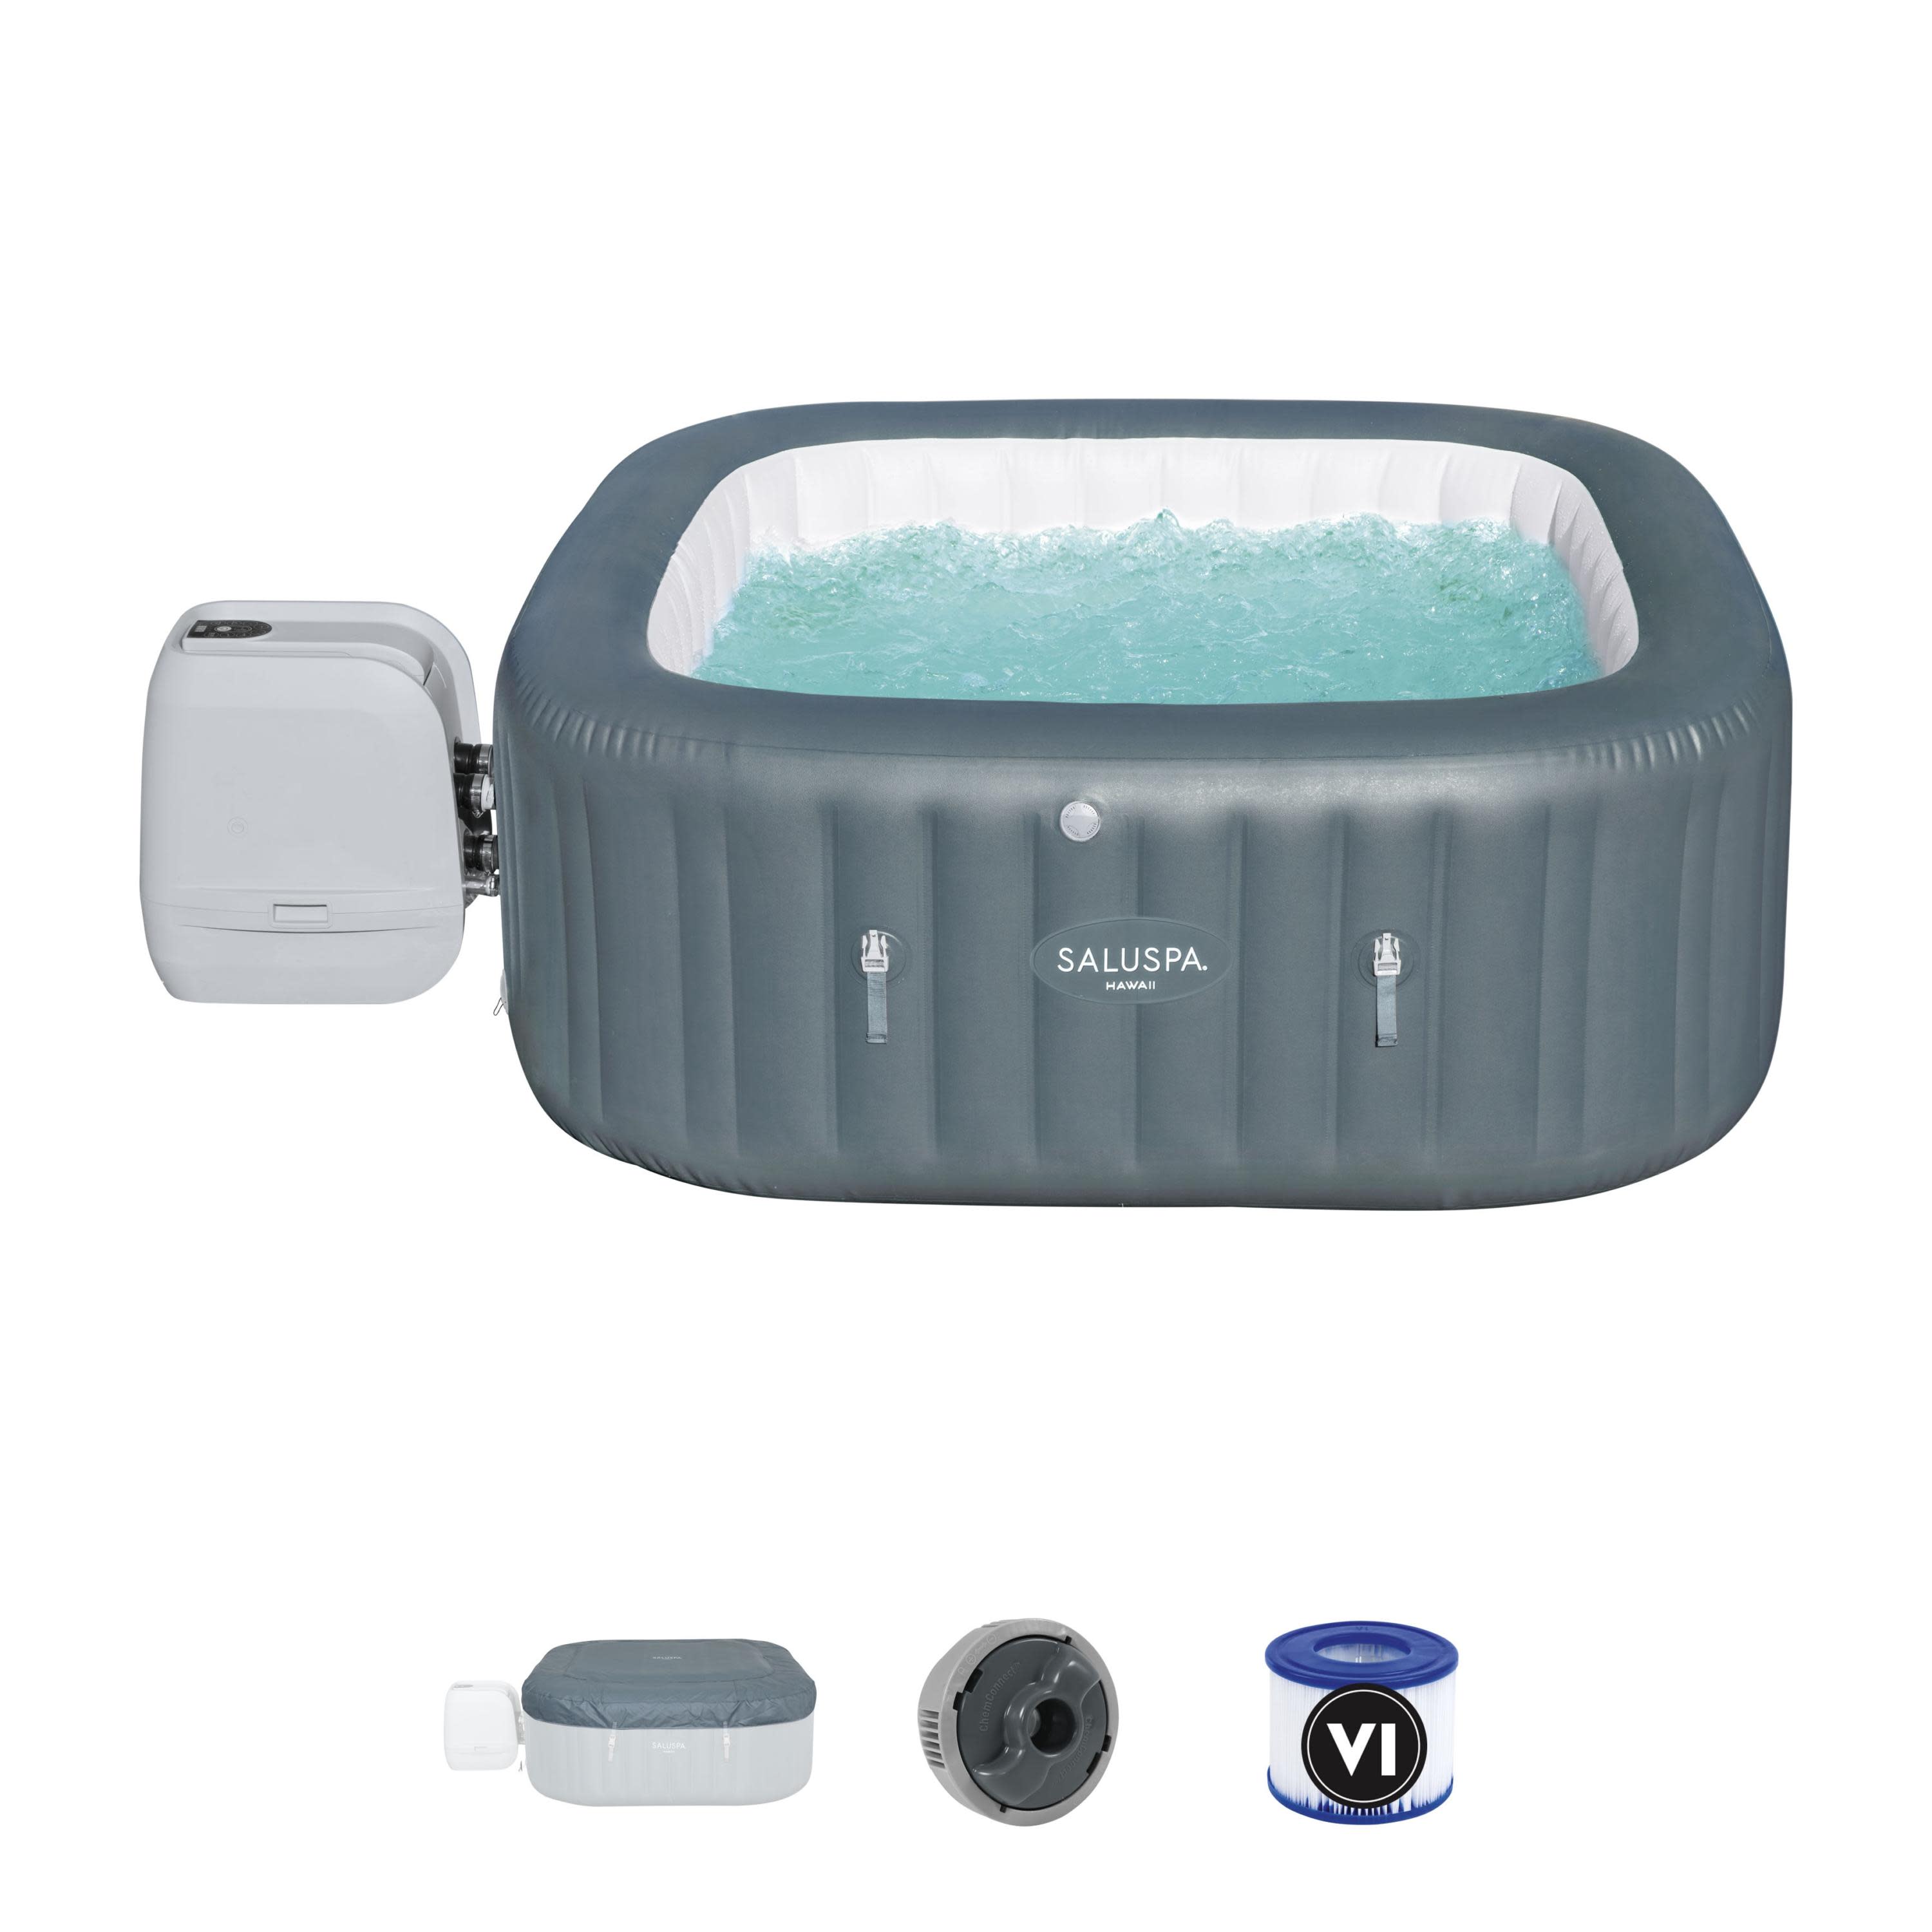 SaluSpa Hawaii HydroJet Pro Inflatable Hot Tub Spa 4-6 Person - image 3 of 9